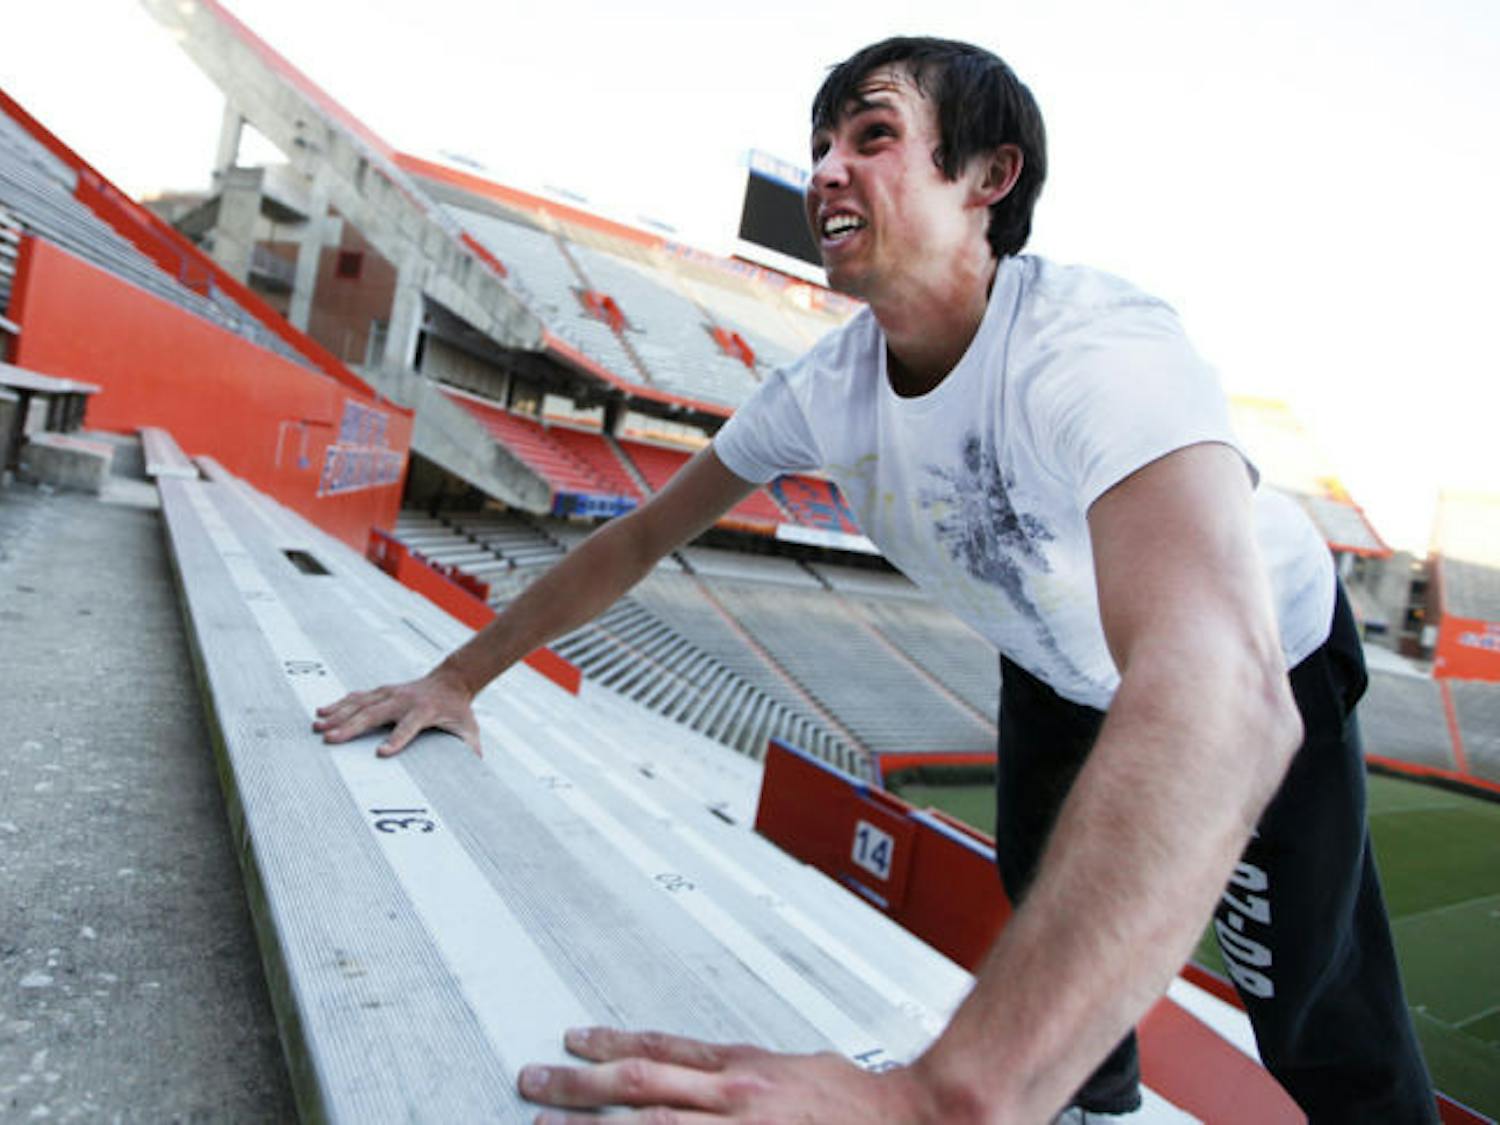 Conrad Cahoon, 22, a UF alumnus and intern with the Florida Springs Institute, exercises at Ben Hill Griffin Stadium on Tuesday evening.